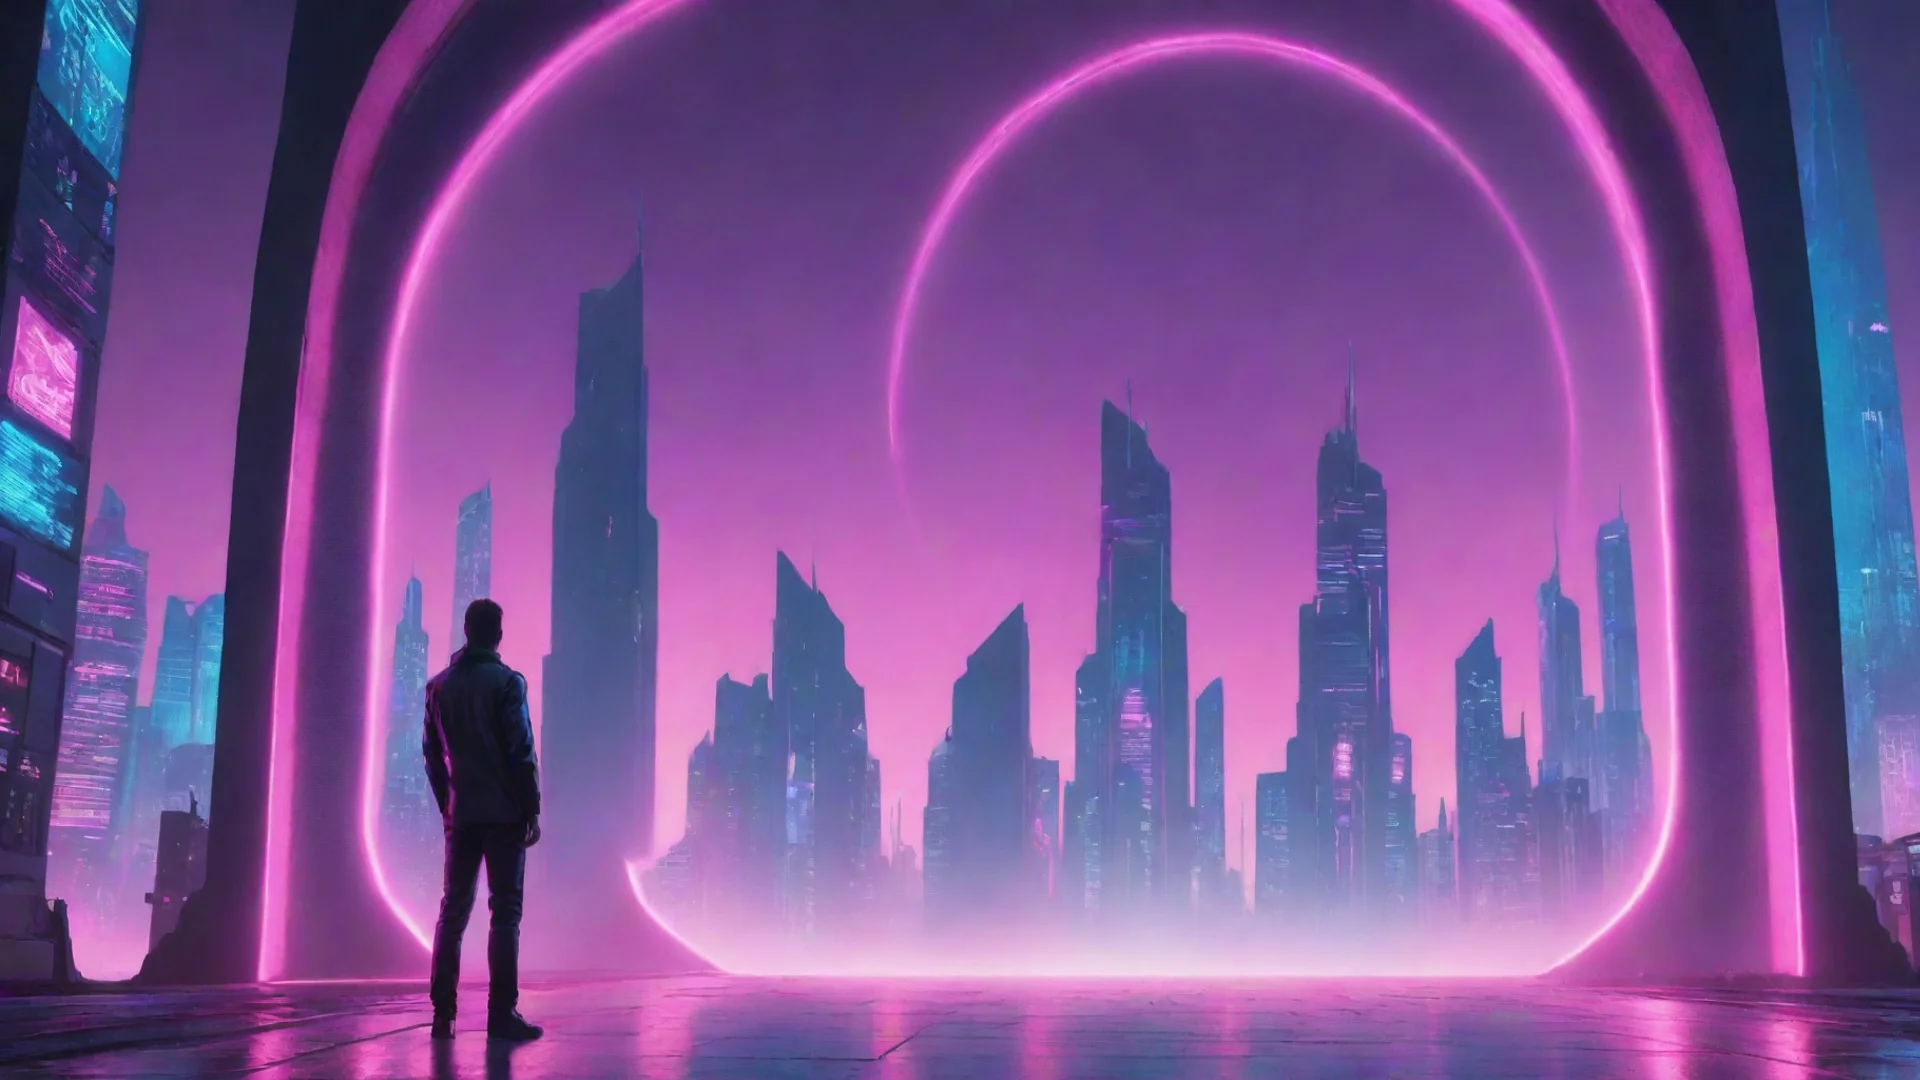 aiamazing synthwave of one man standing behind the portal of the futuristic city awesome portrait 2 wide